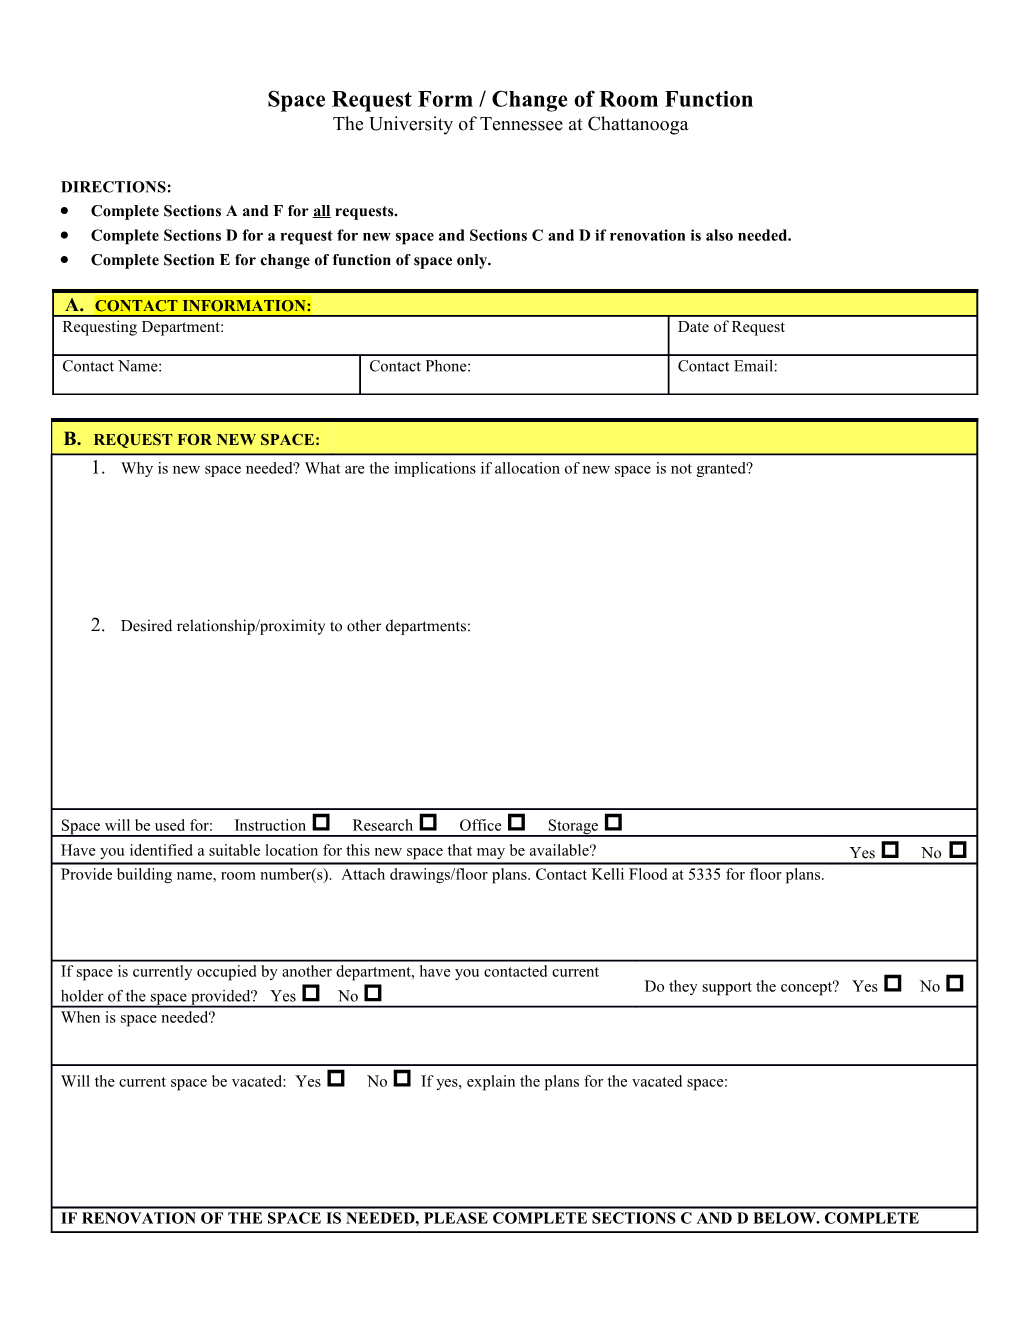 Space Allocation Request Form